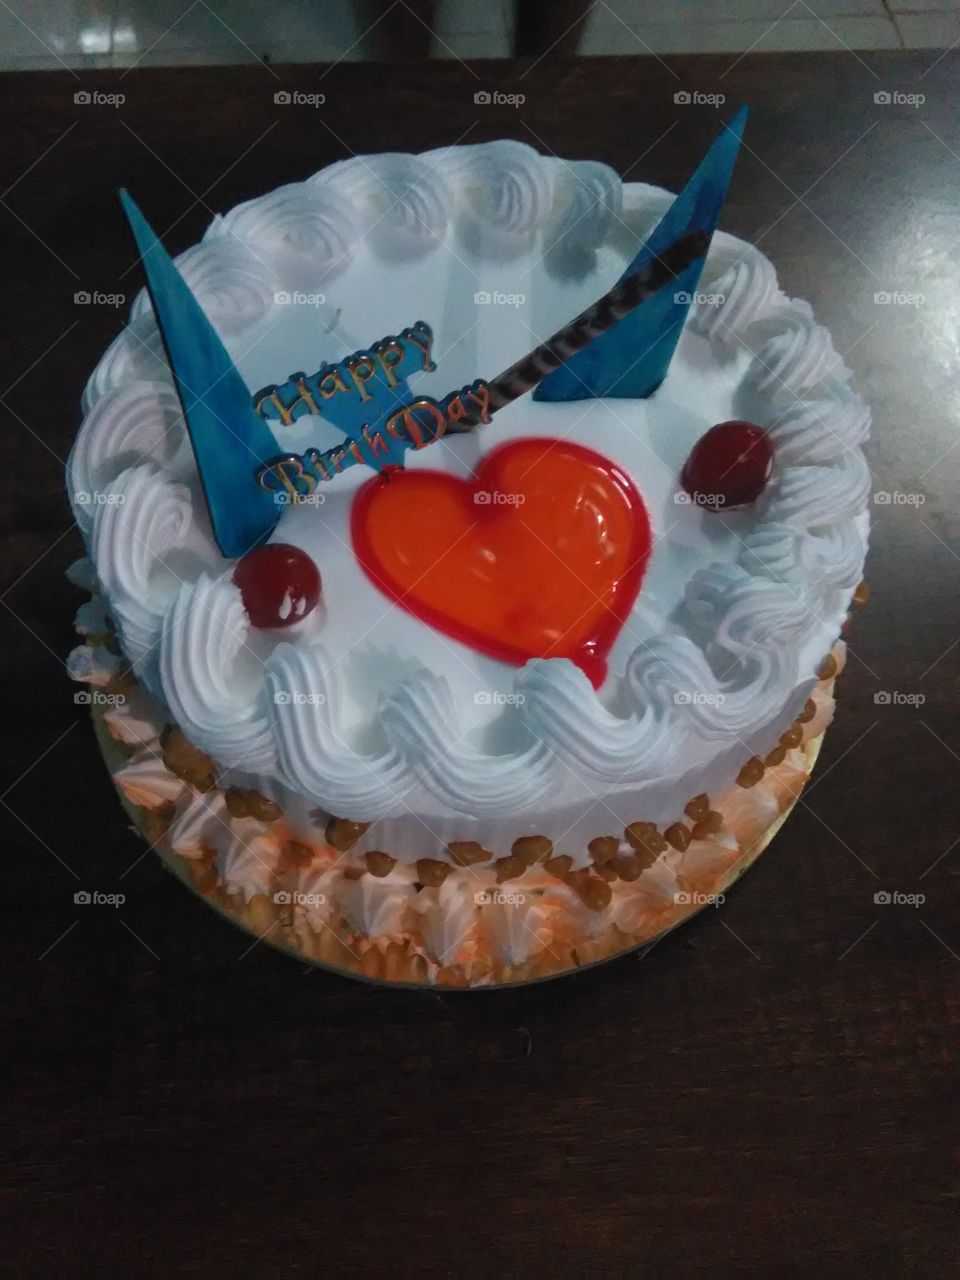 This is a very beautiful birthday cake from badday girl